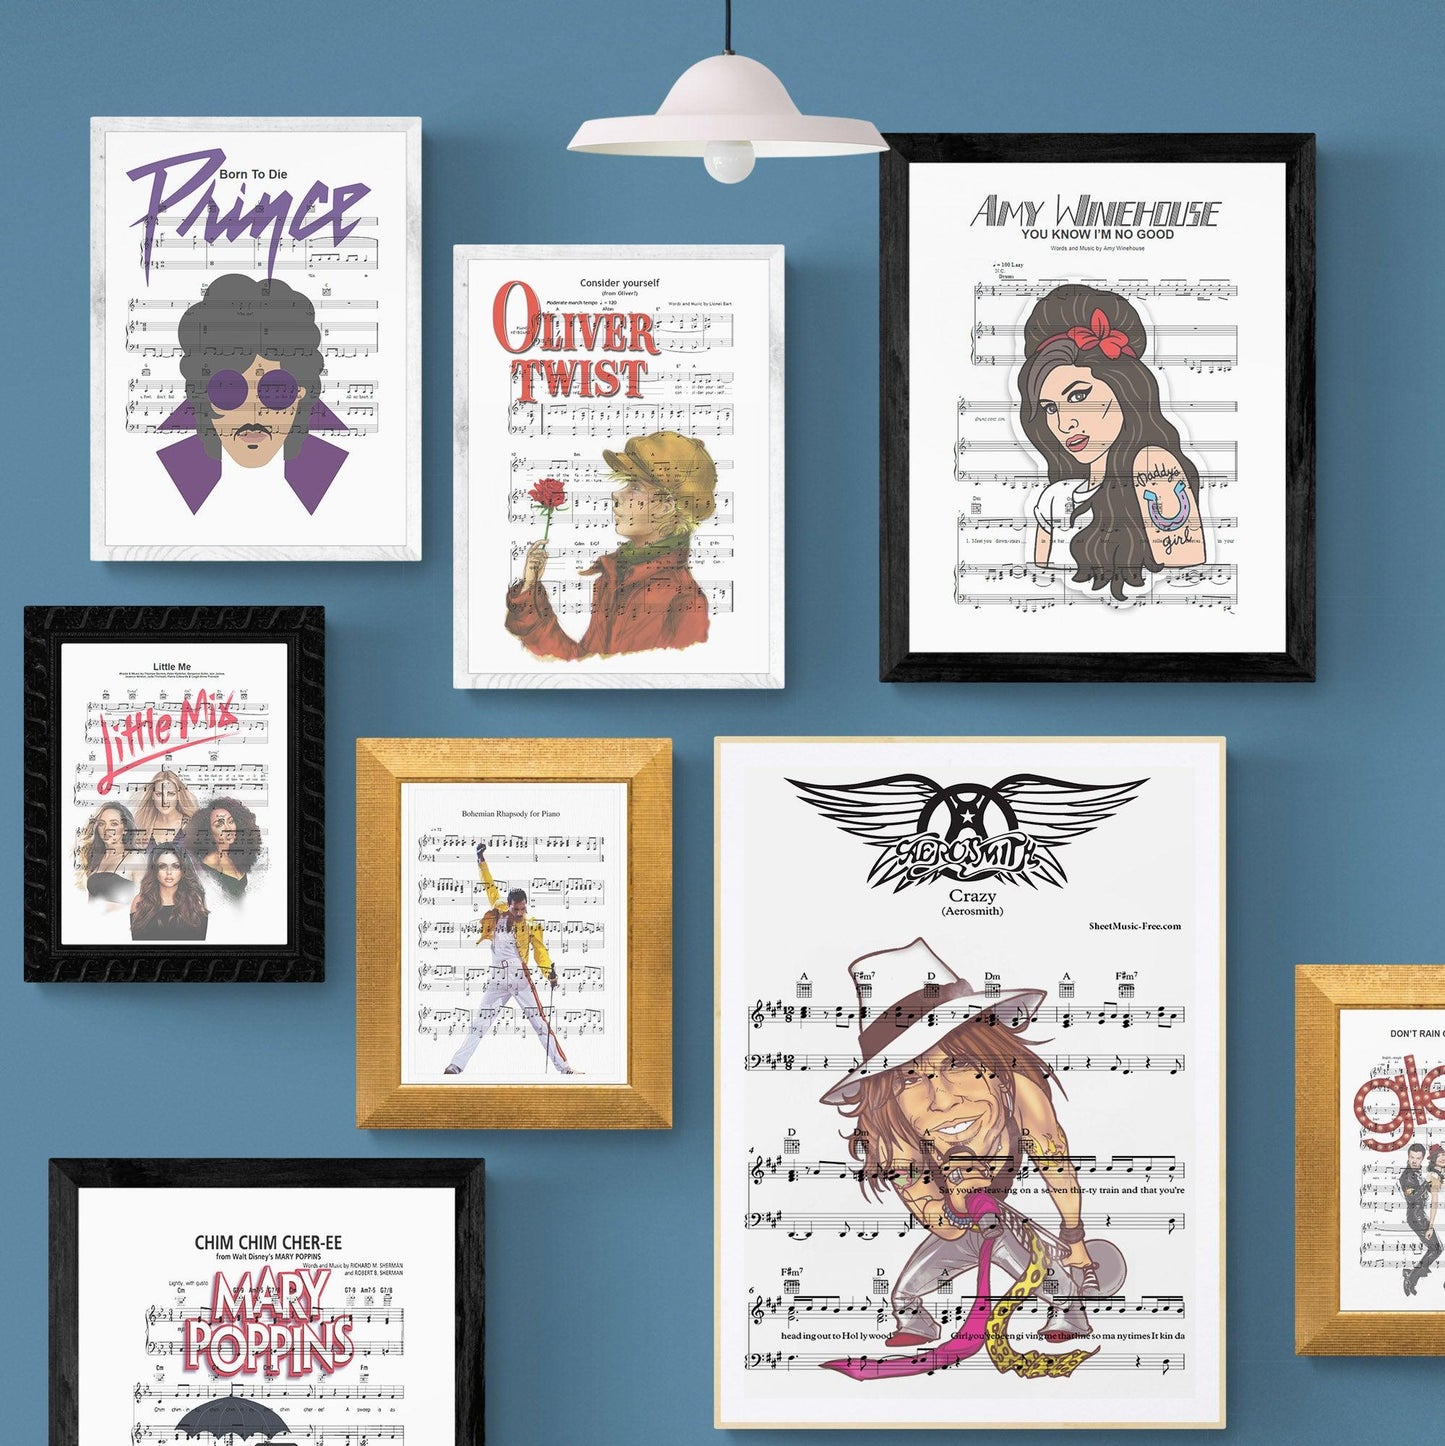 Aerosmith - Crazy Print | Song Music Sheet Notes Print Everyone has a favorite song especially Aerosmith, and now you can show the score as printed staff. The personal favorite song sheet print shows the song chosen as the score. 